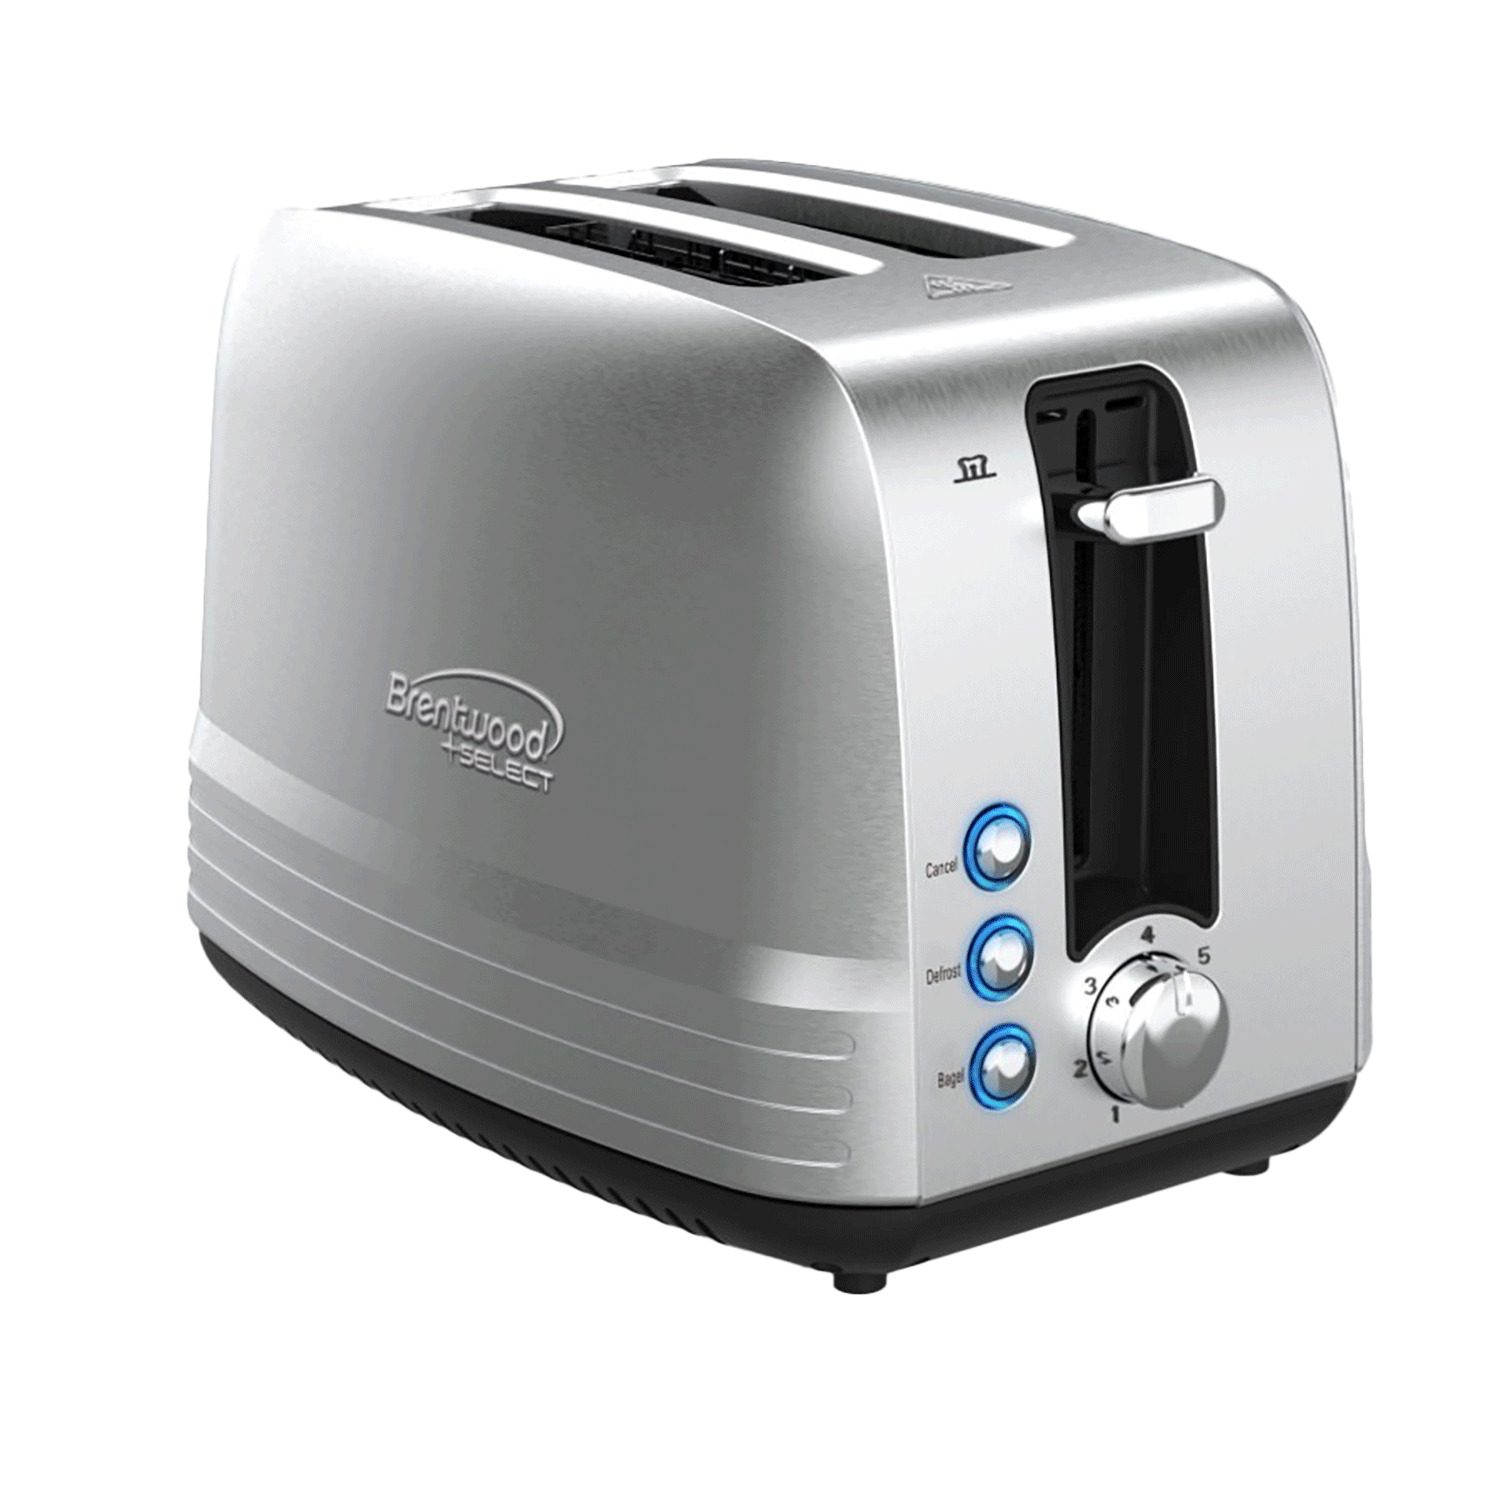 Brentwood - Extra wide slot 2-slice toaster